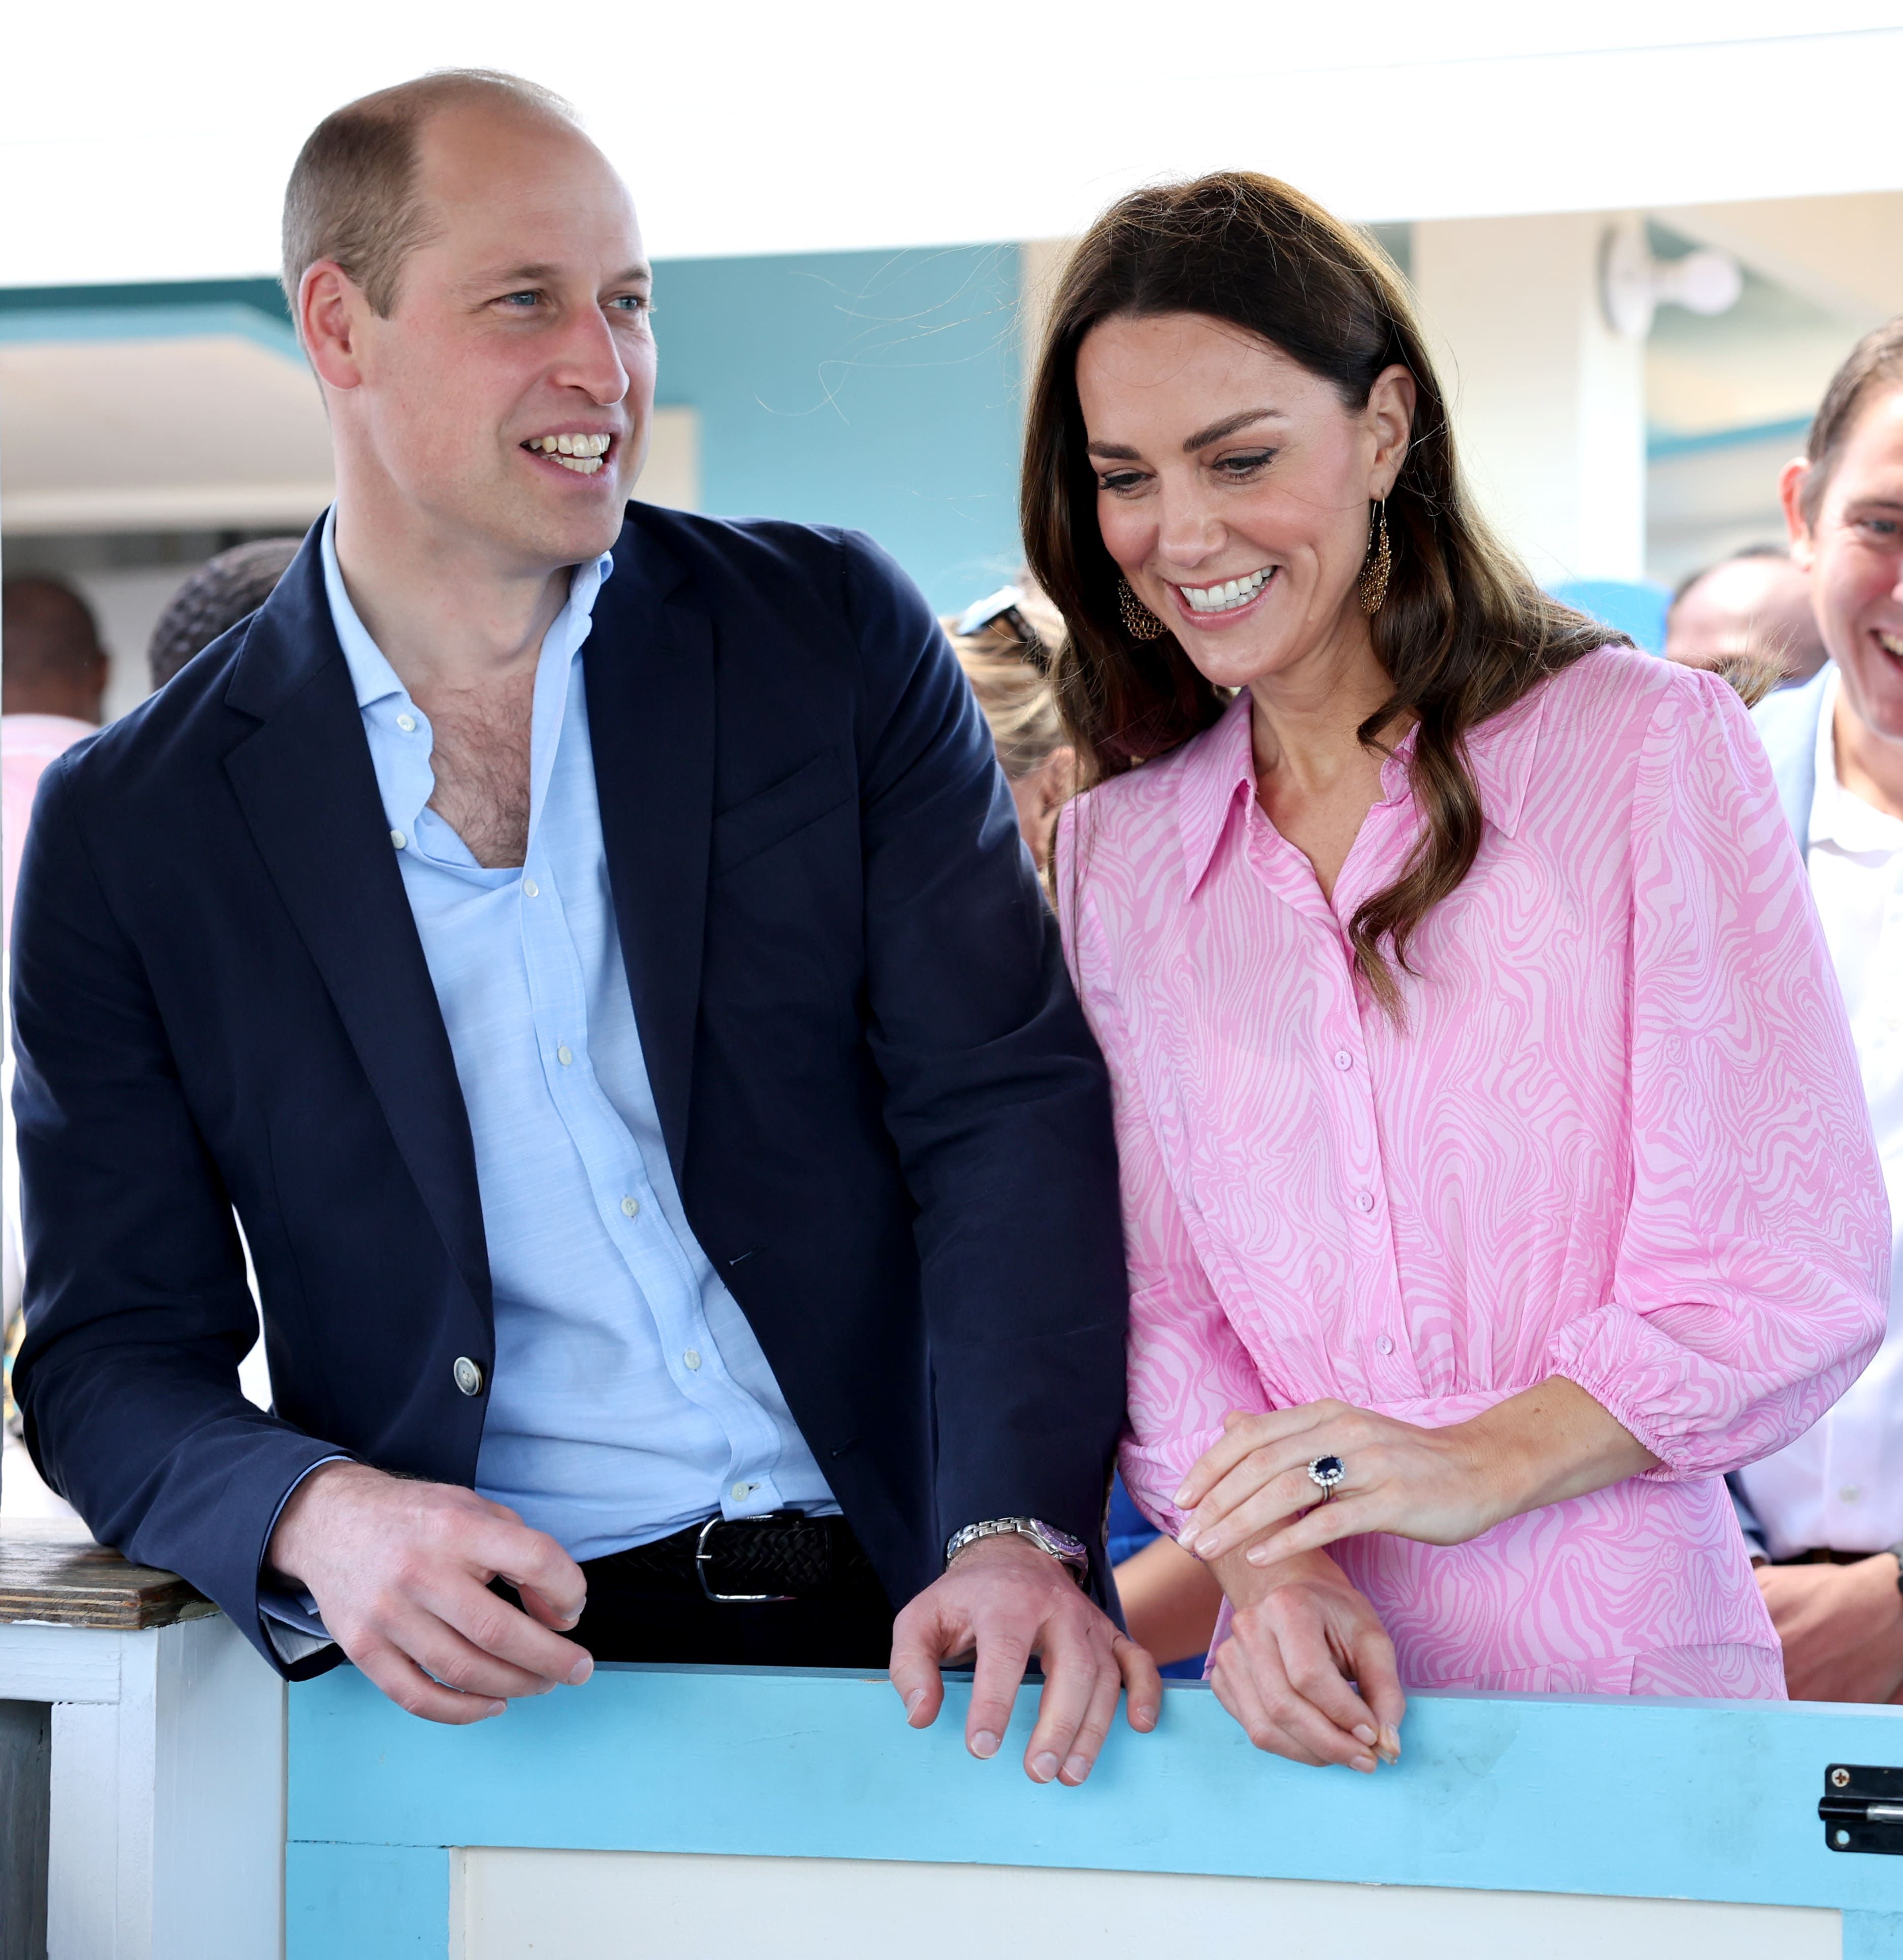 Fans React To Viral TikTok Video Of Kate Middleton And Prince William